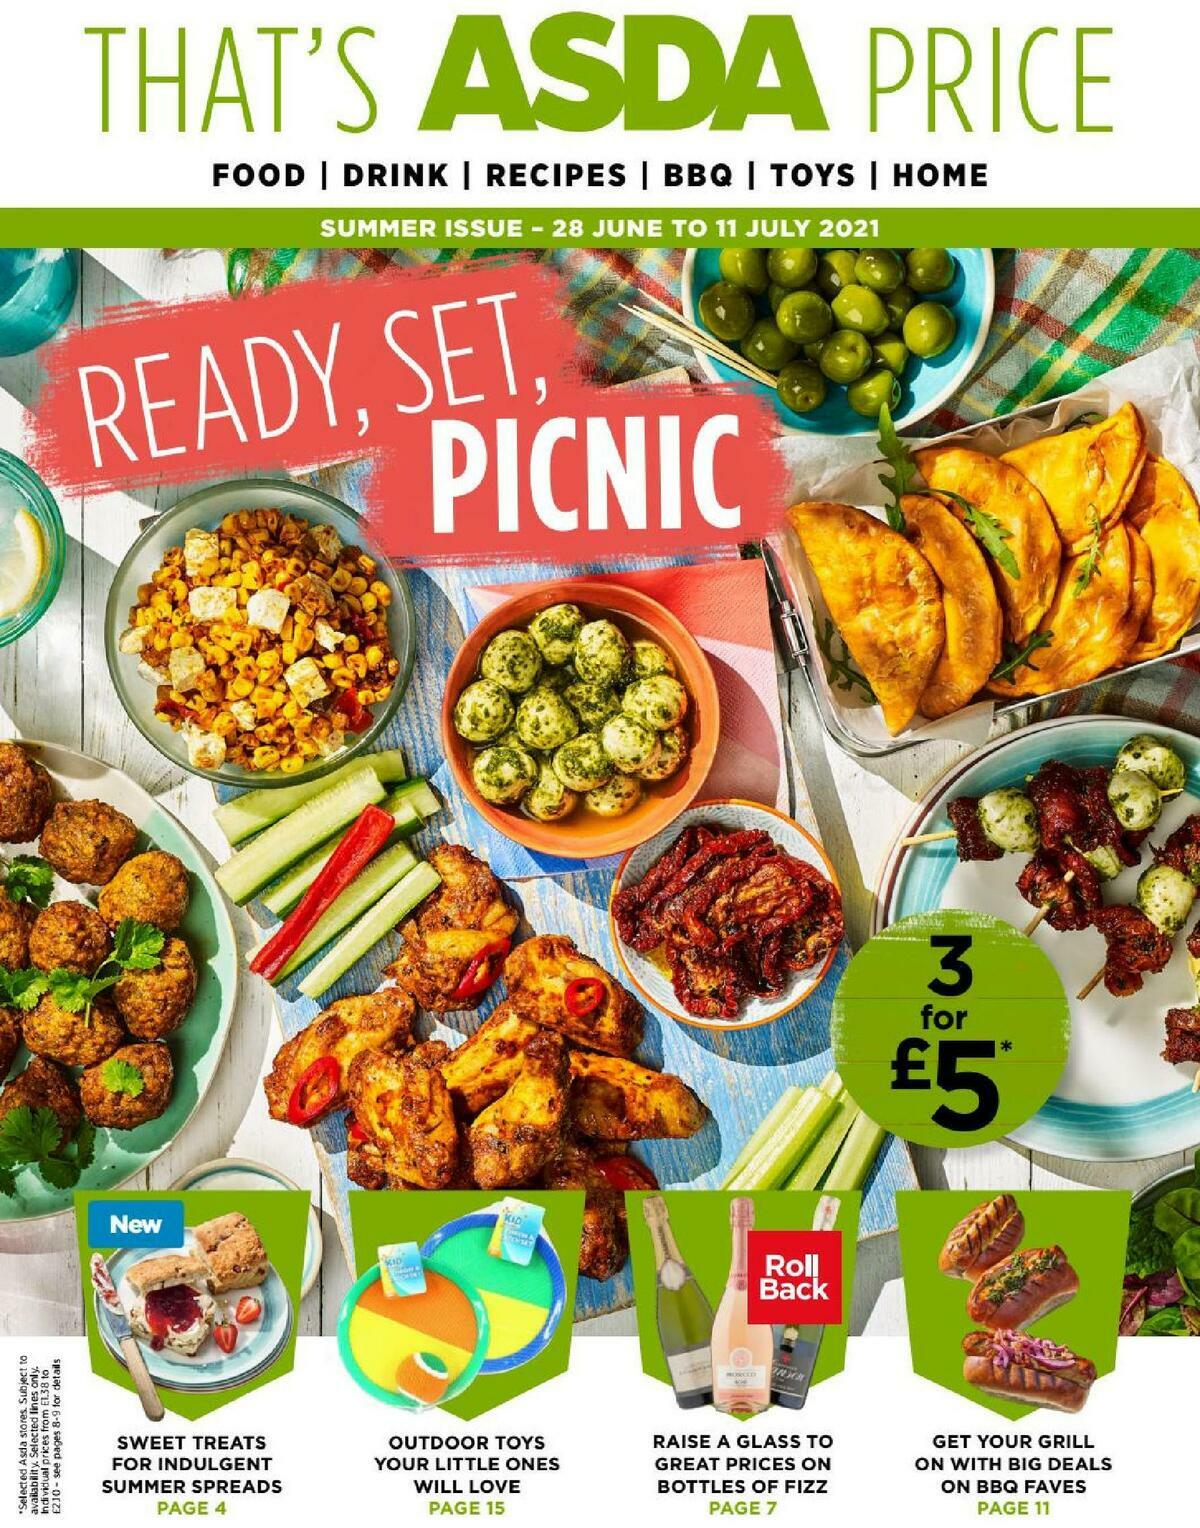 ASDA That's Asda Price Summer Offers from 28 June